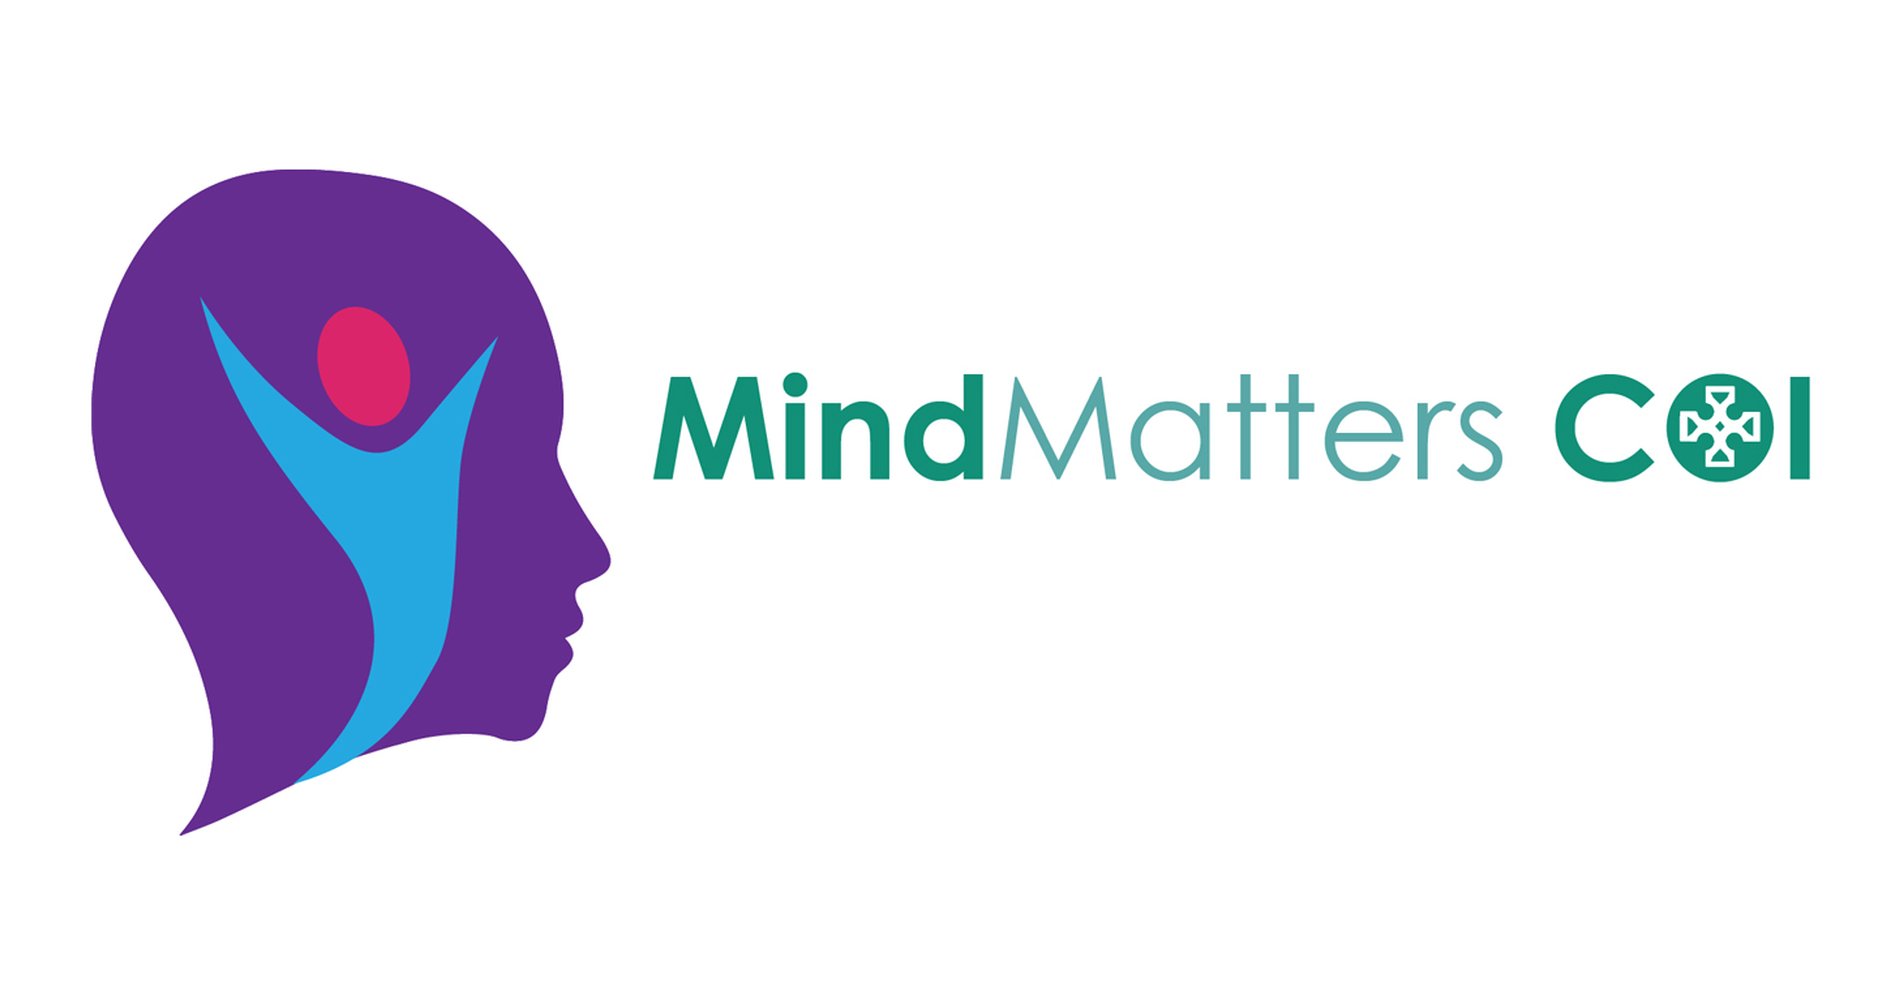 MindMatters COI is back